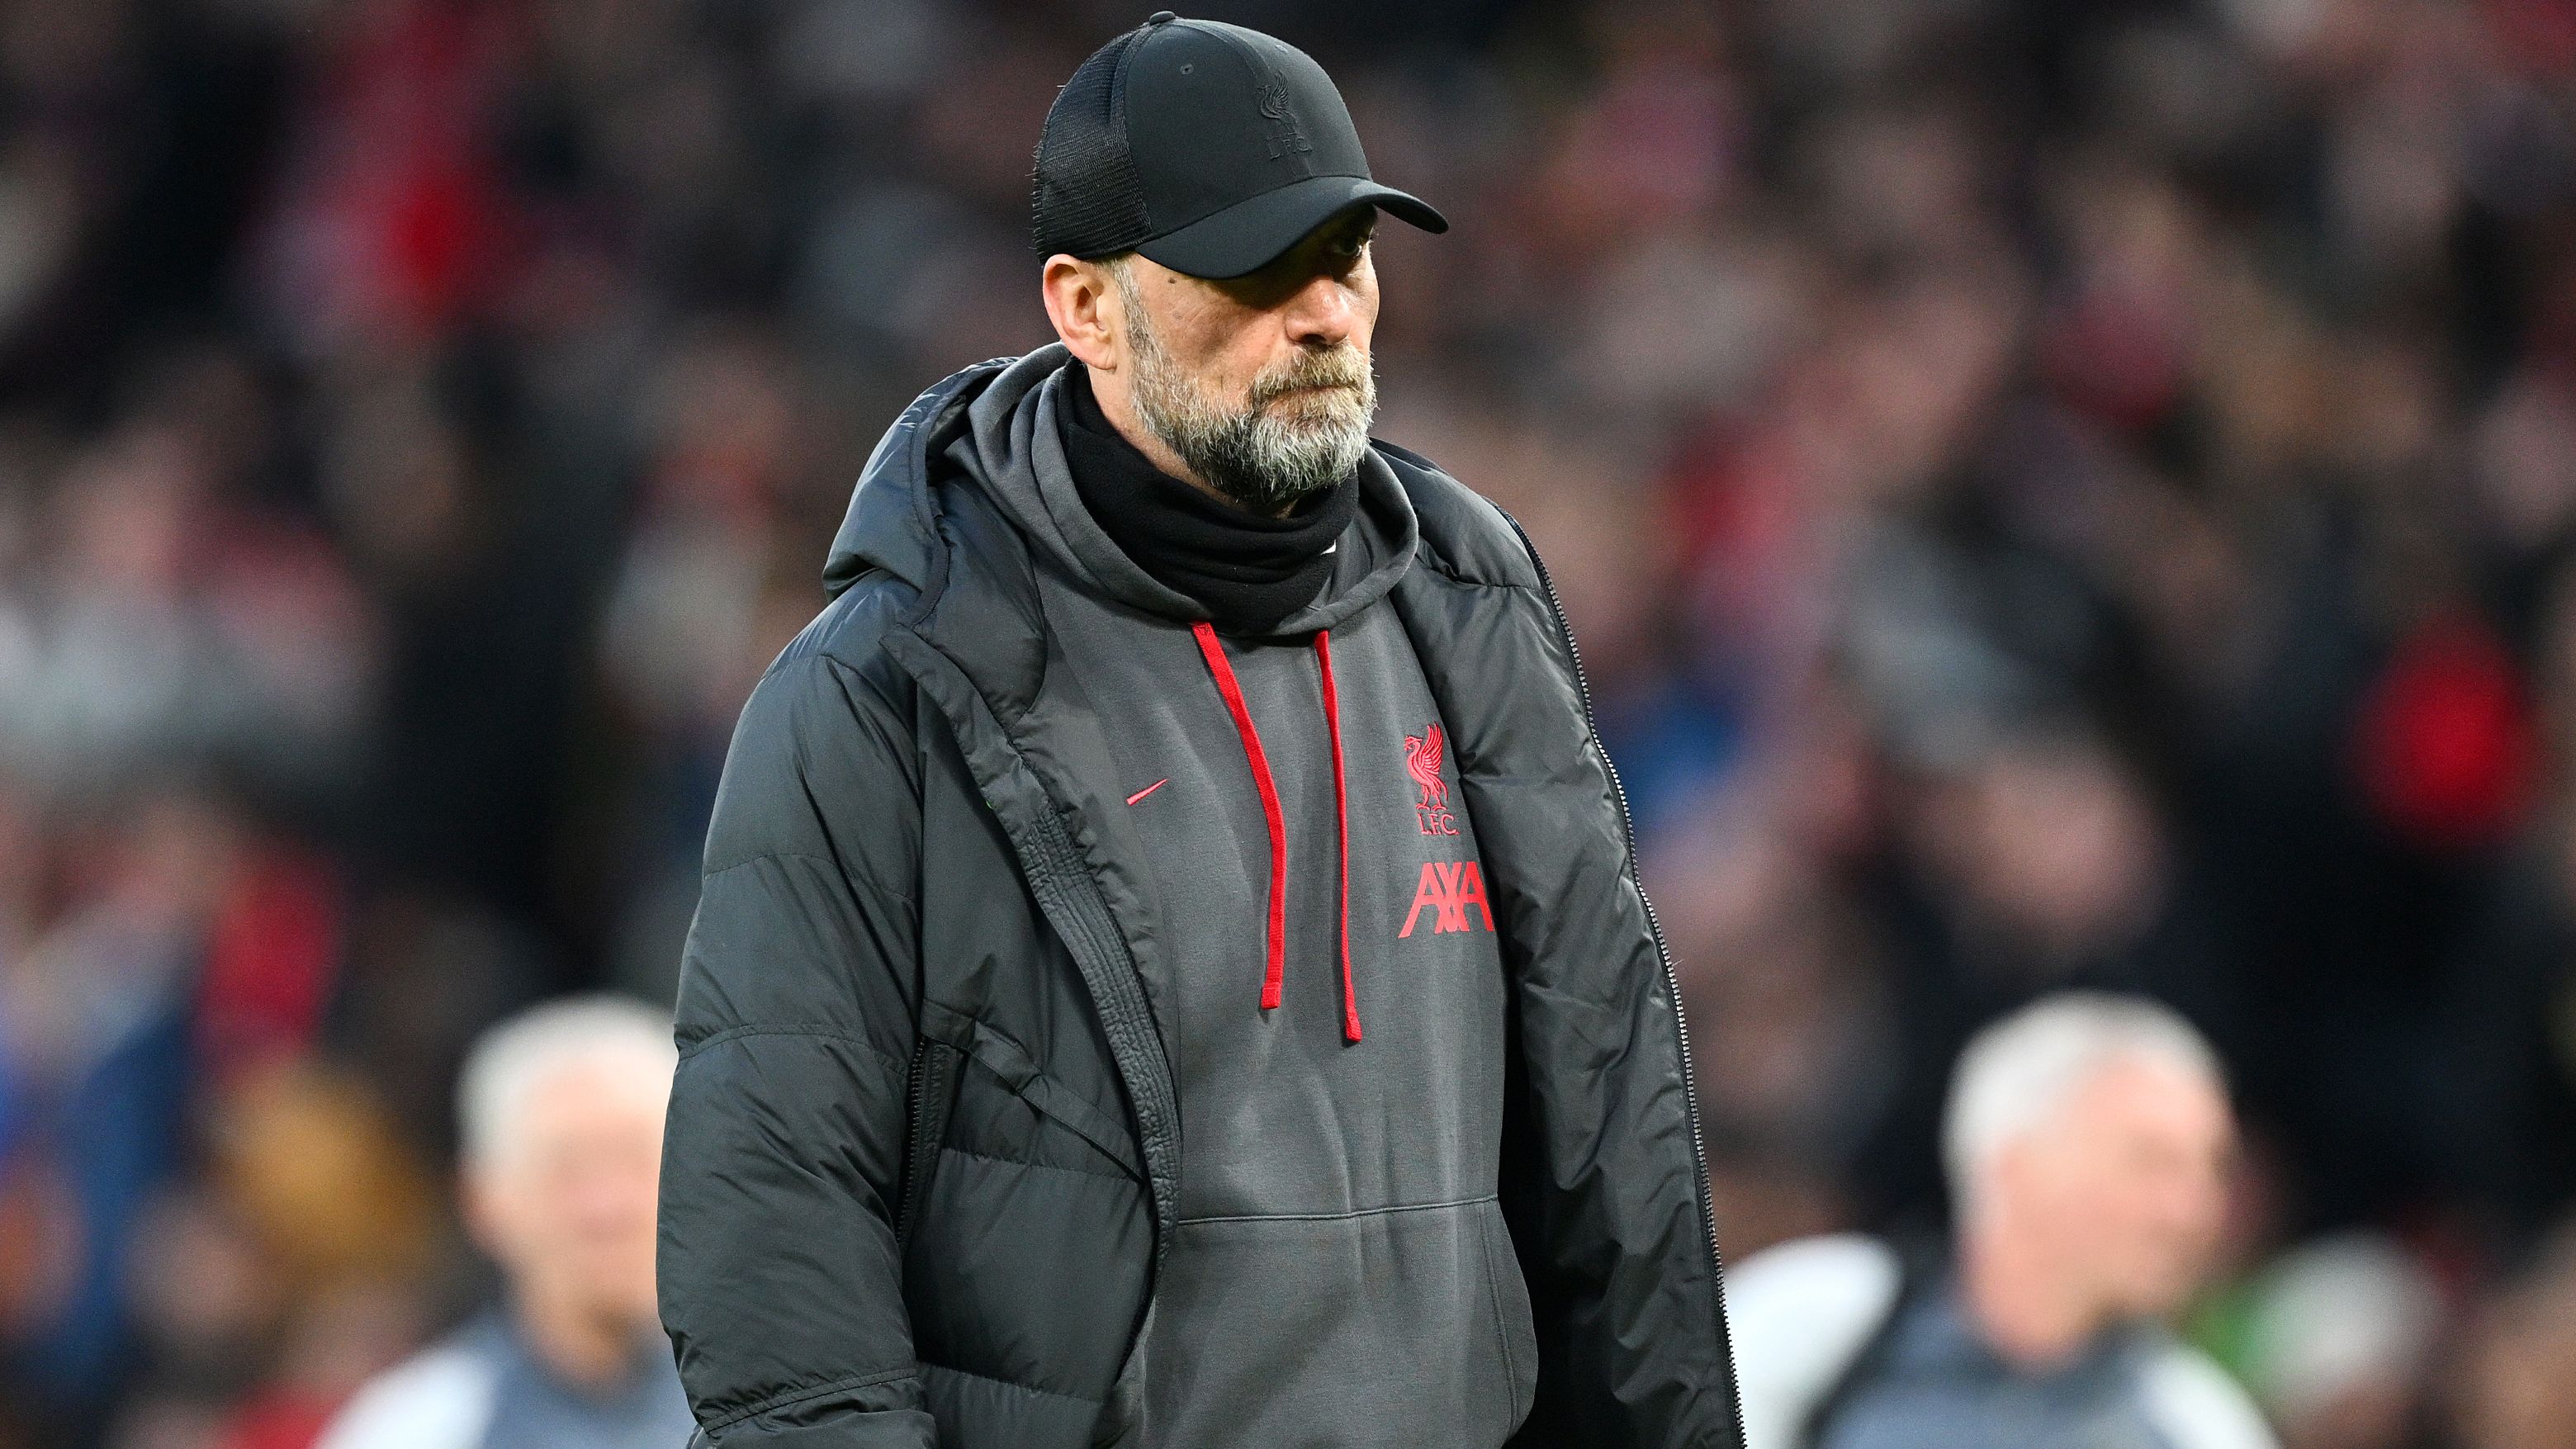 'Dumb question': Jurgen Klopp storms out of interview after dramatic FA Cup loss to Man United